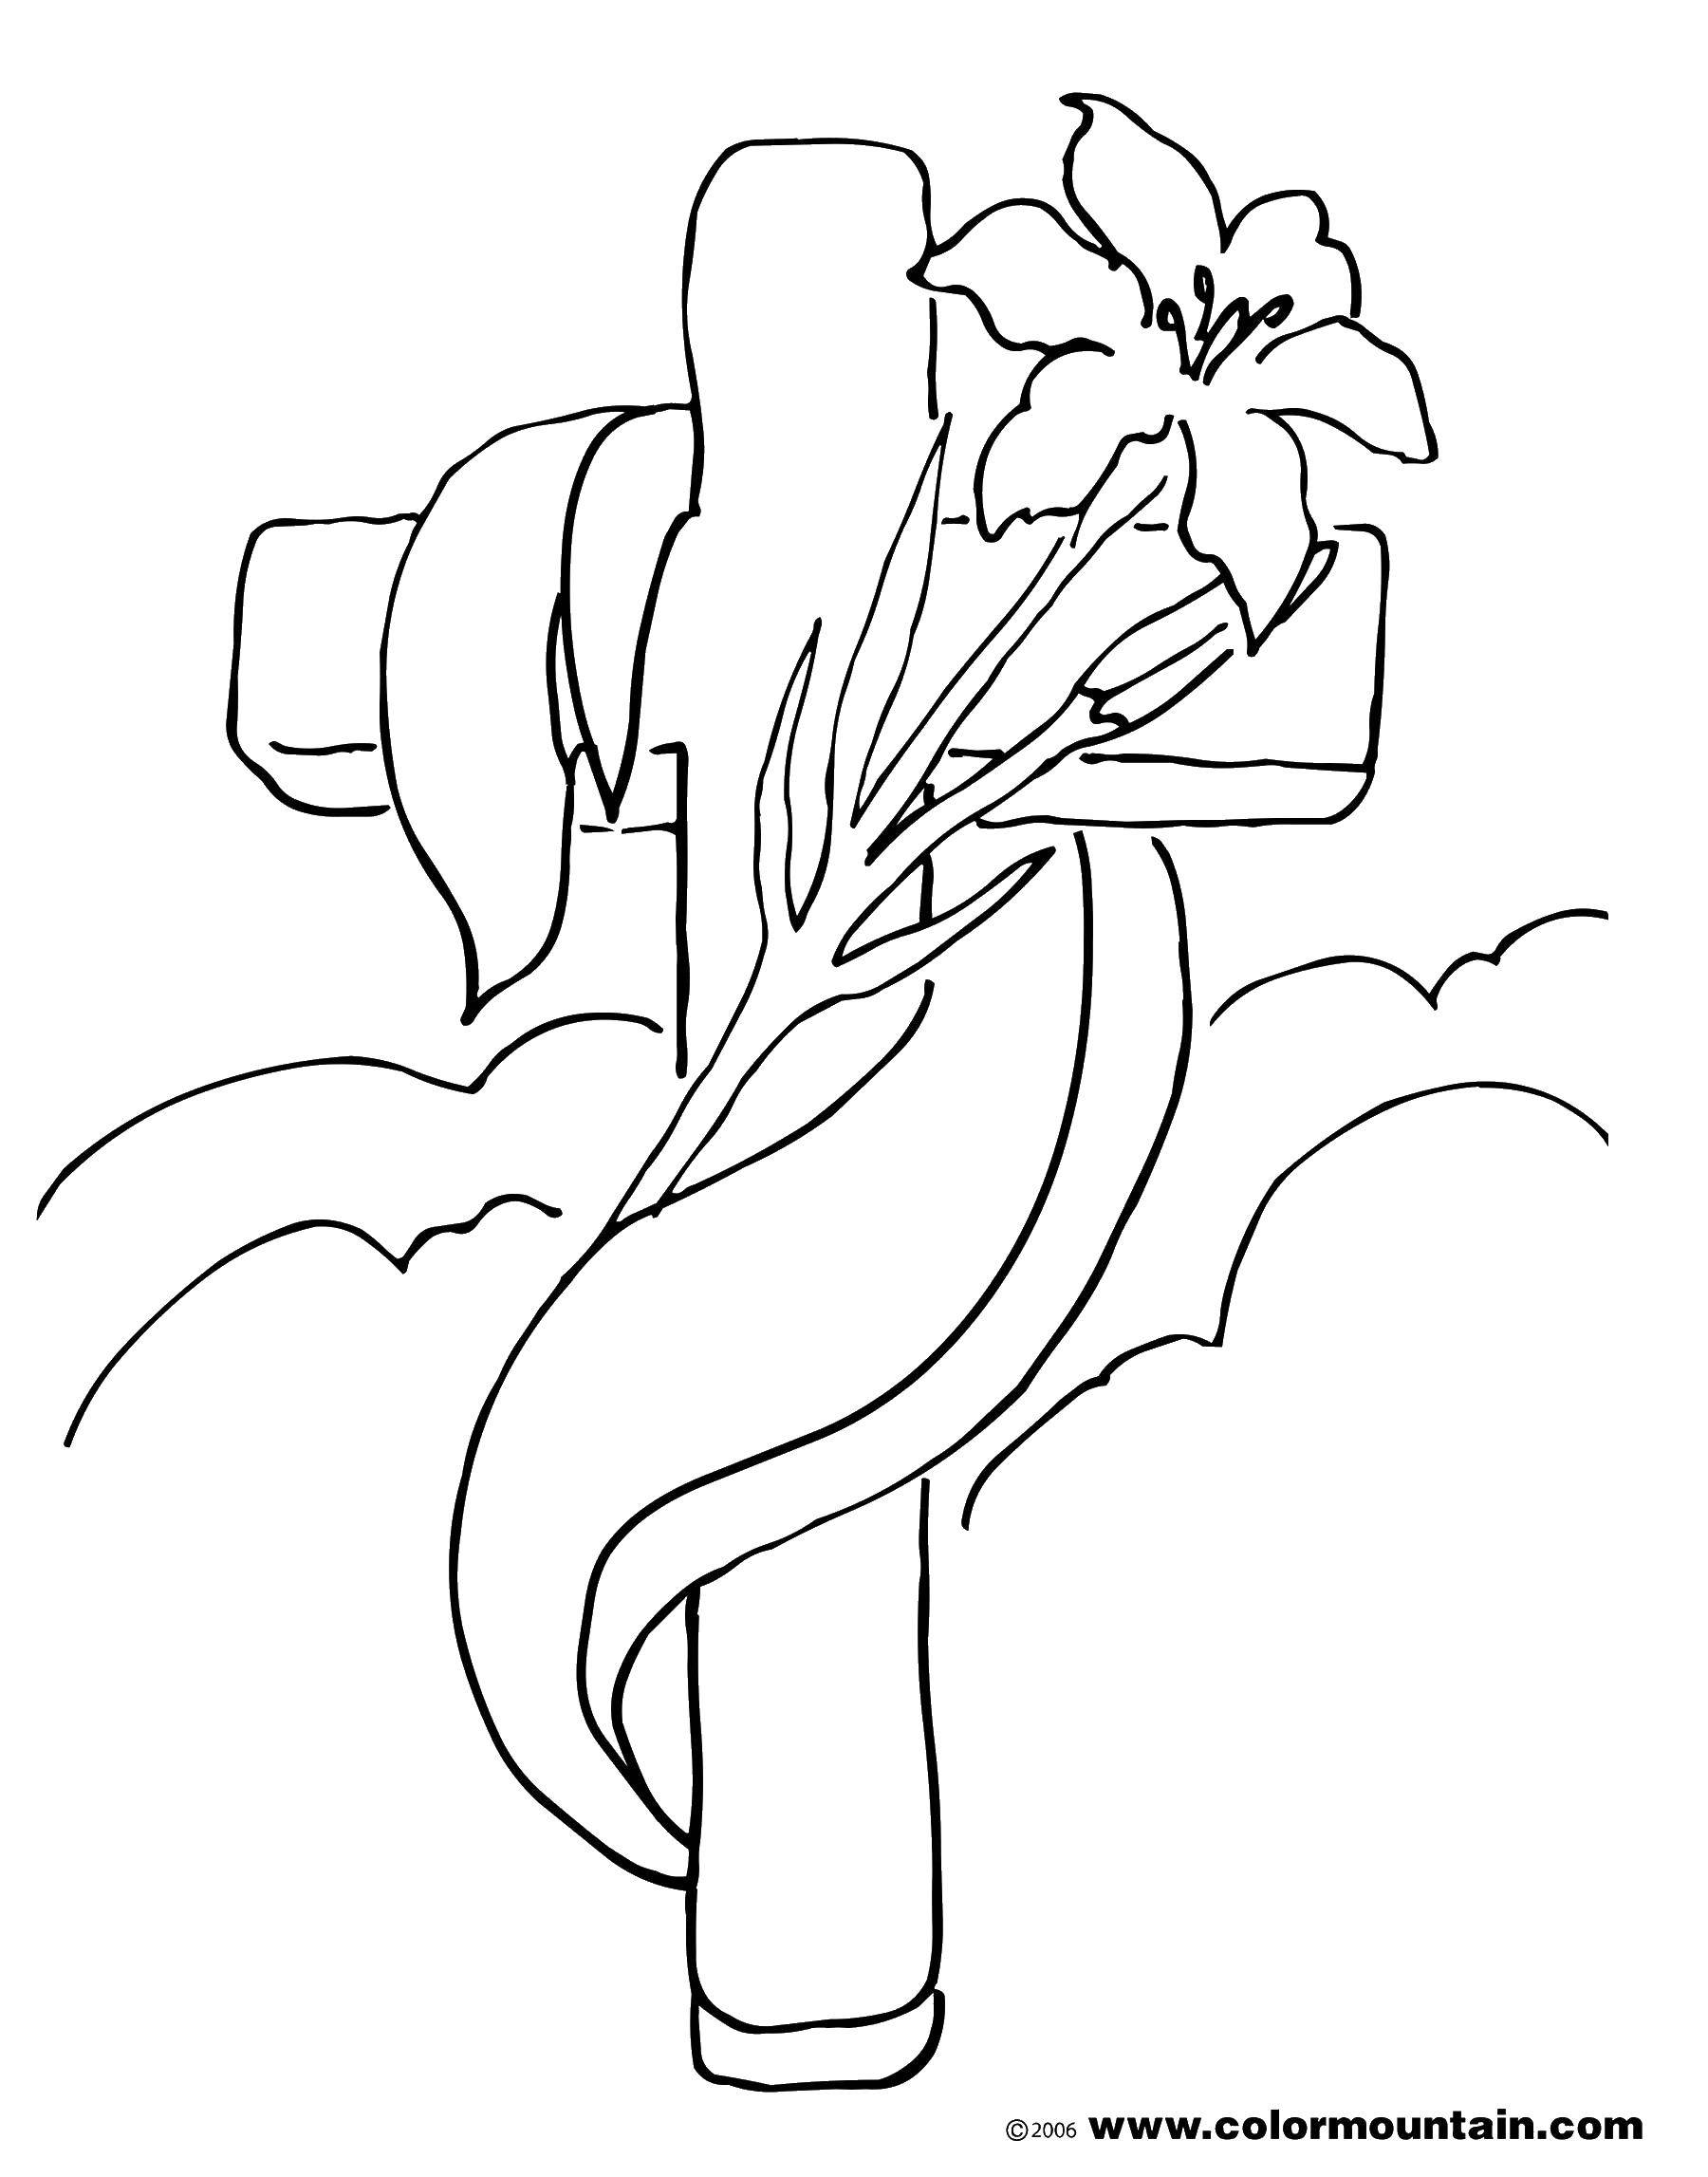 Coloring Cross and Lily. Category coloring pages cross. Tags:  cross, Lily.